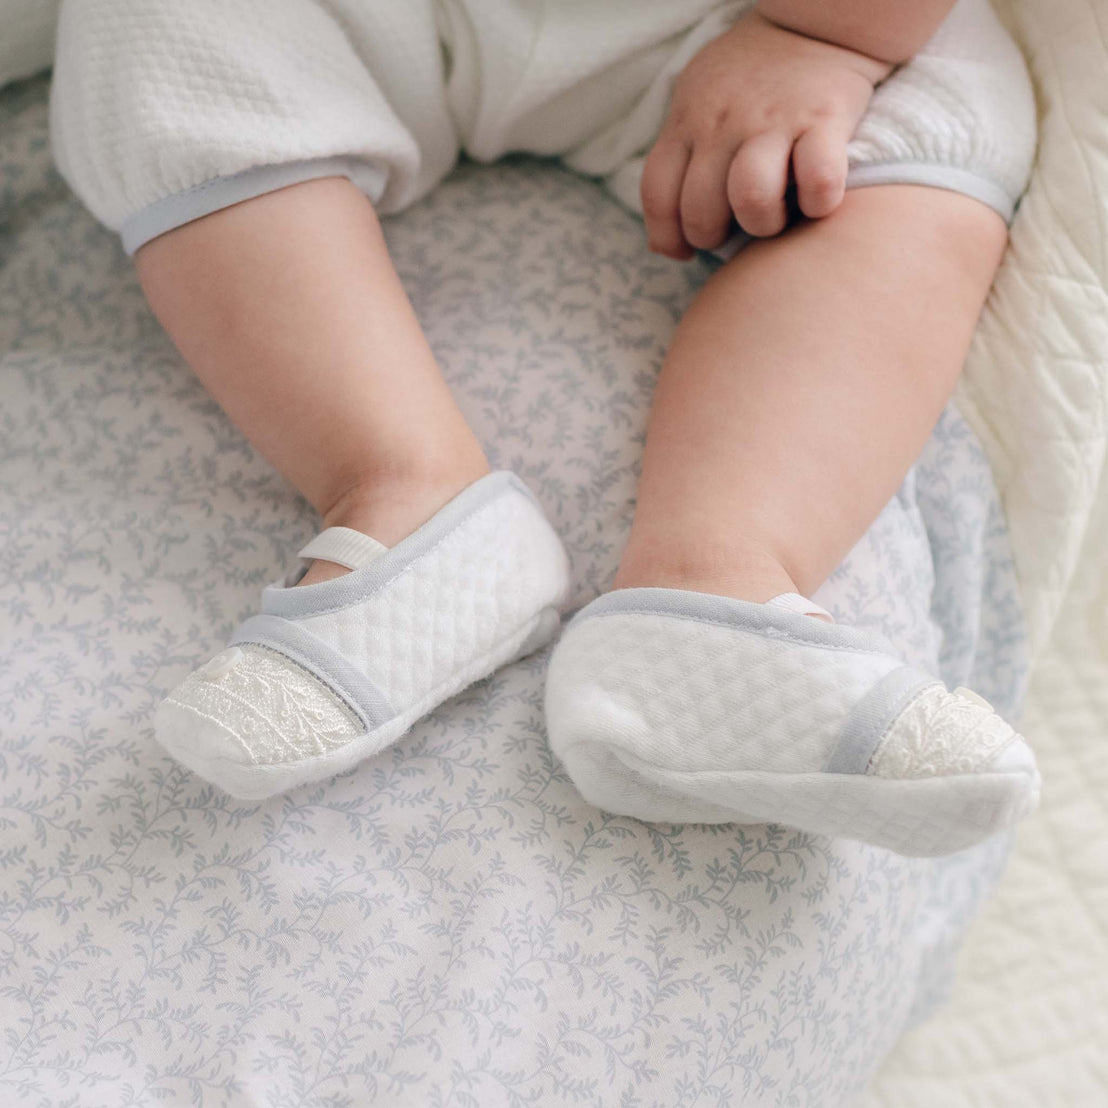 A close-up of a baby's legs and feet showcases the baby dressed in a white outfit with light blue trim, paired with Harrison Booties—quilted baby shoes featuring lace detail on the toes. The baby is seated on a soft, patterned blanket adorned with a floral design, creating an heirloom-worthy moment.